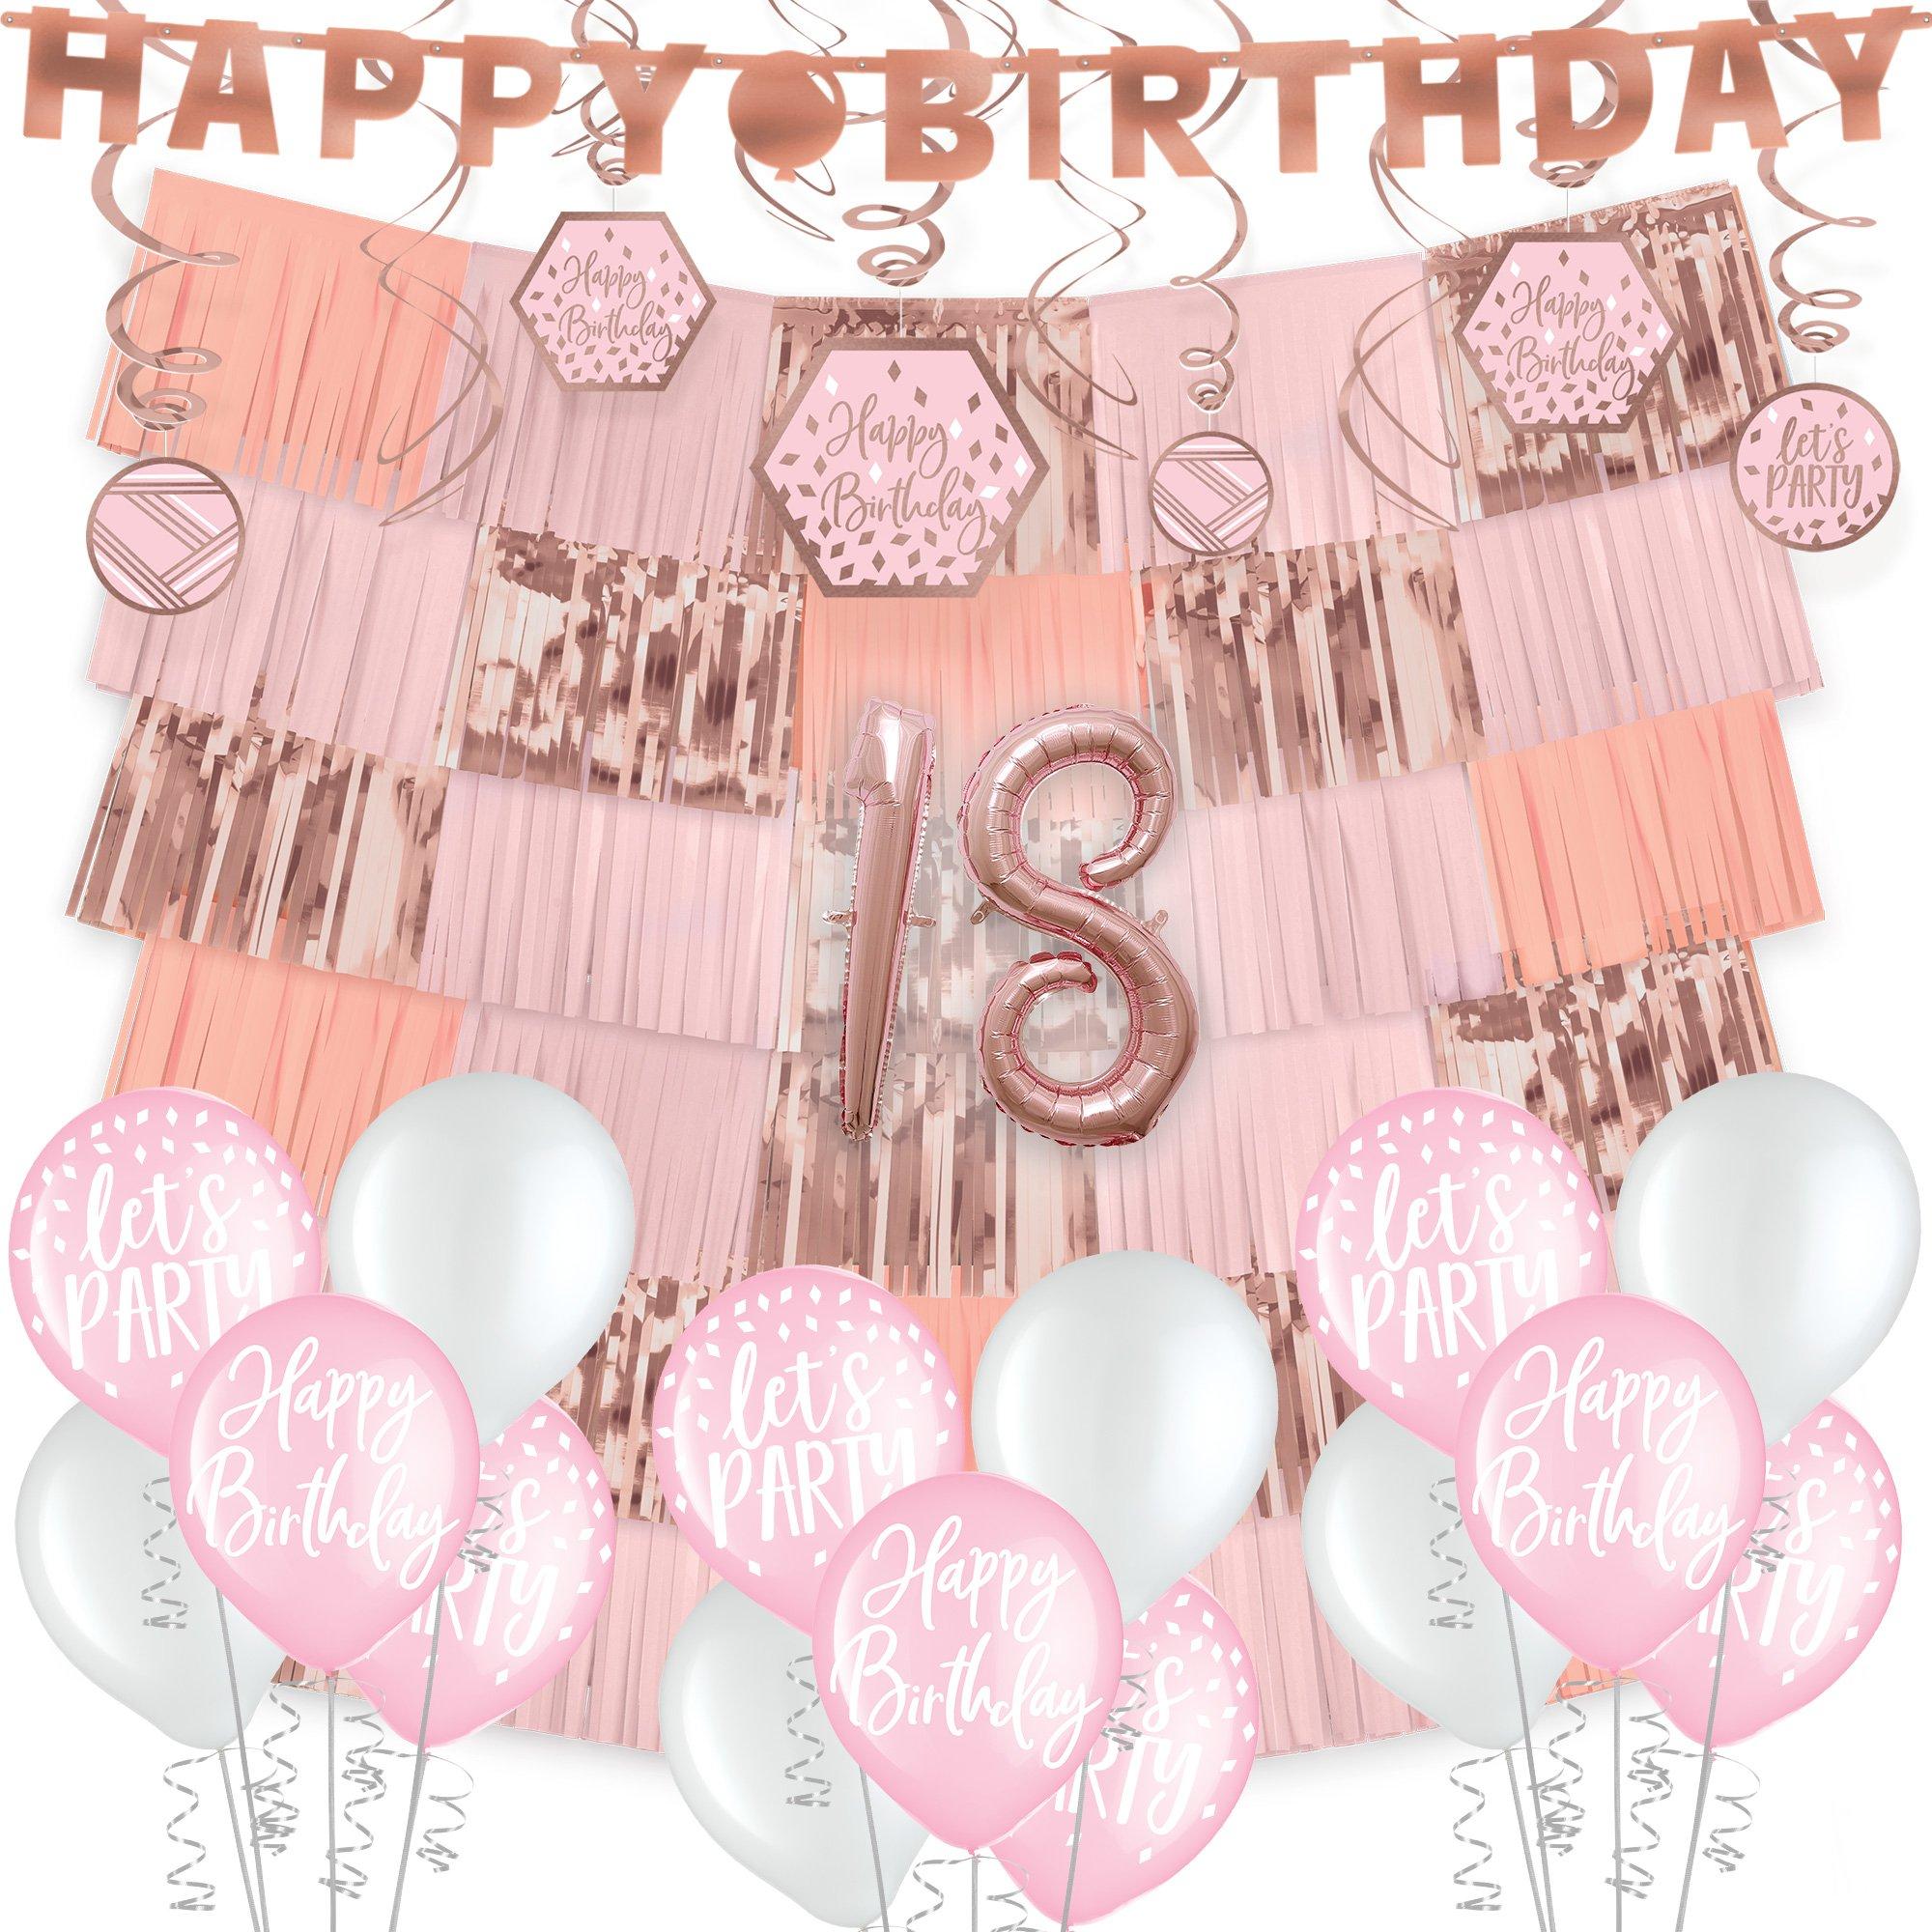 Pink and White Balloons for Birthday Decorations - Pack of 75